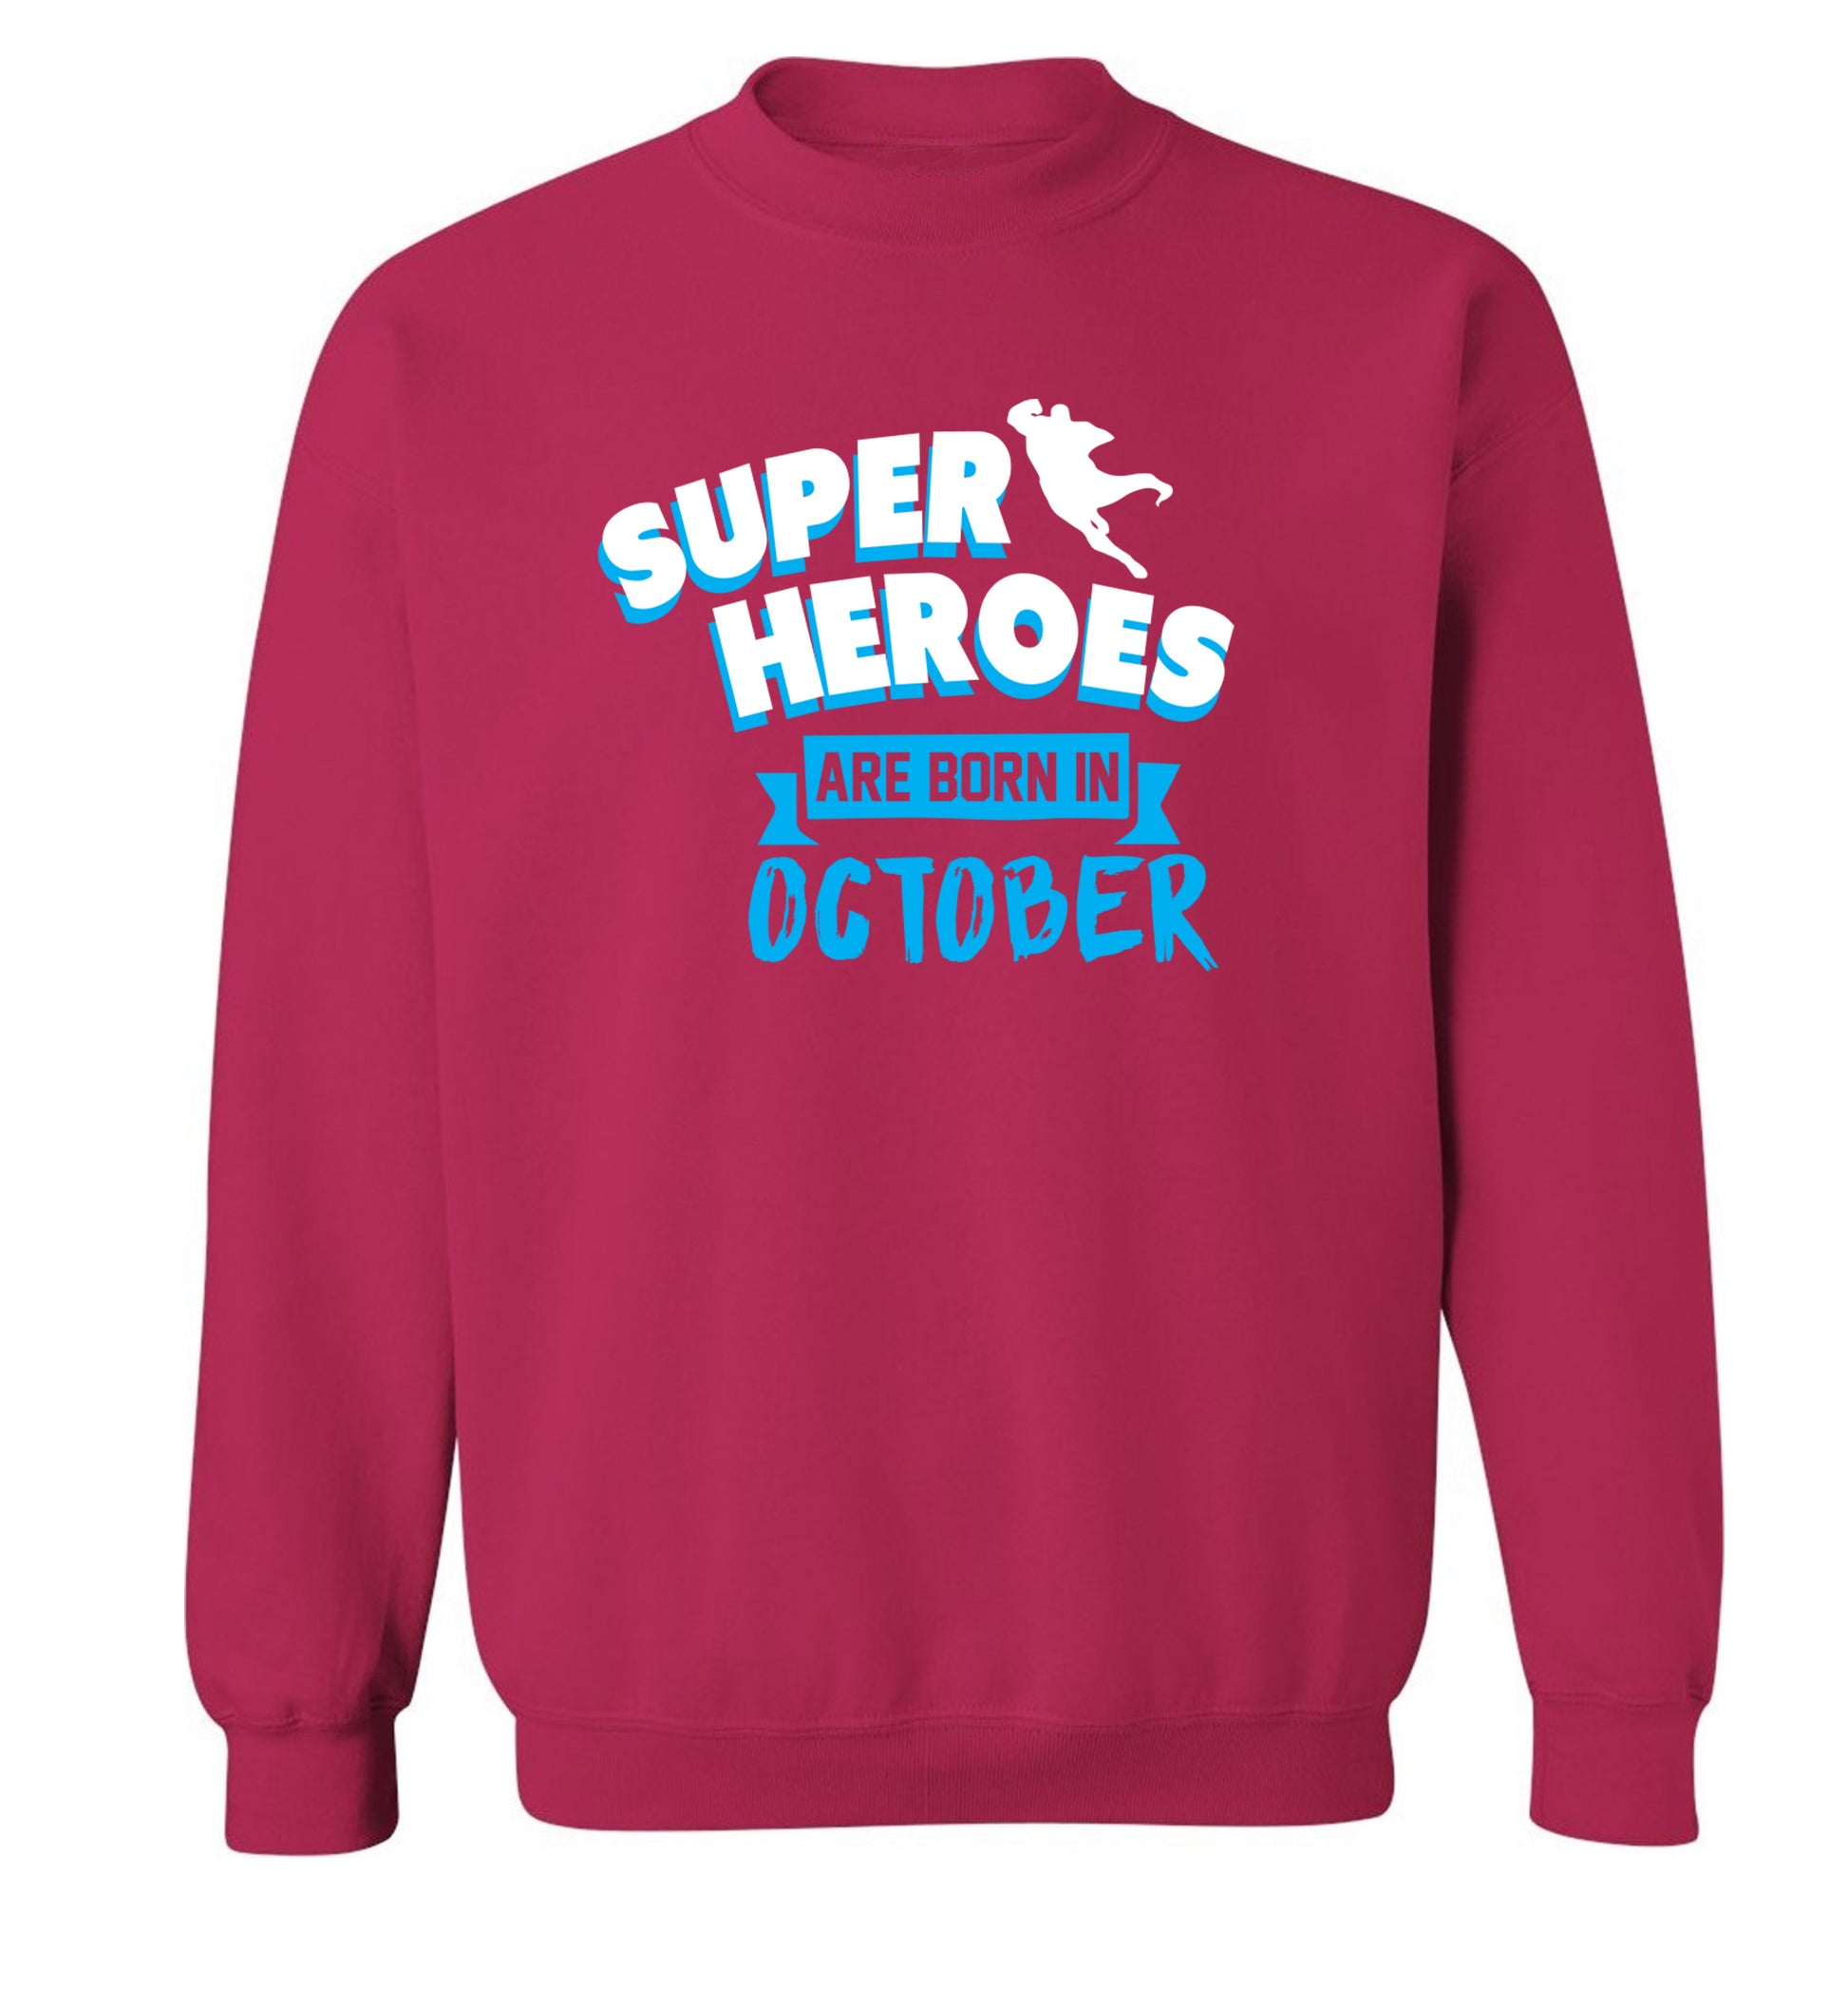 Superheroes are born in October Adult's unisex pink Sweater 2XL